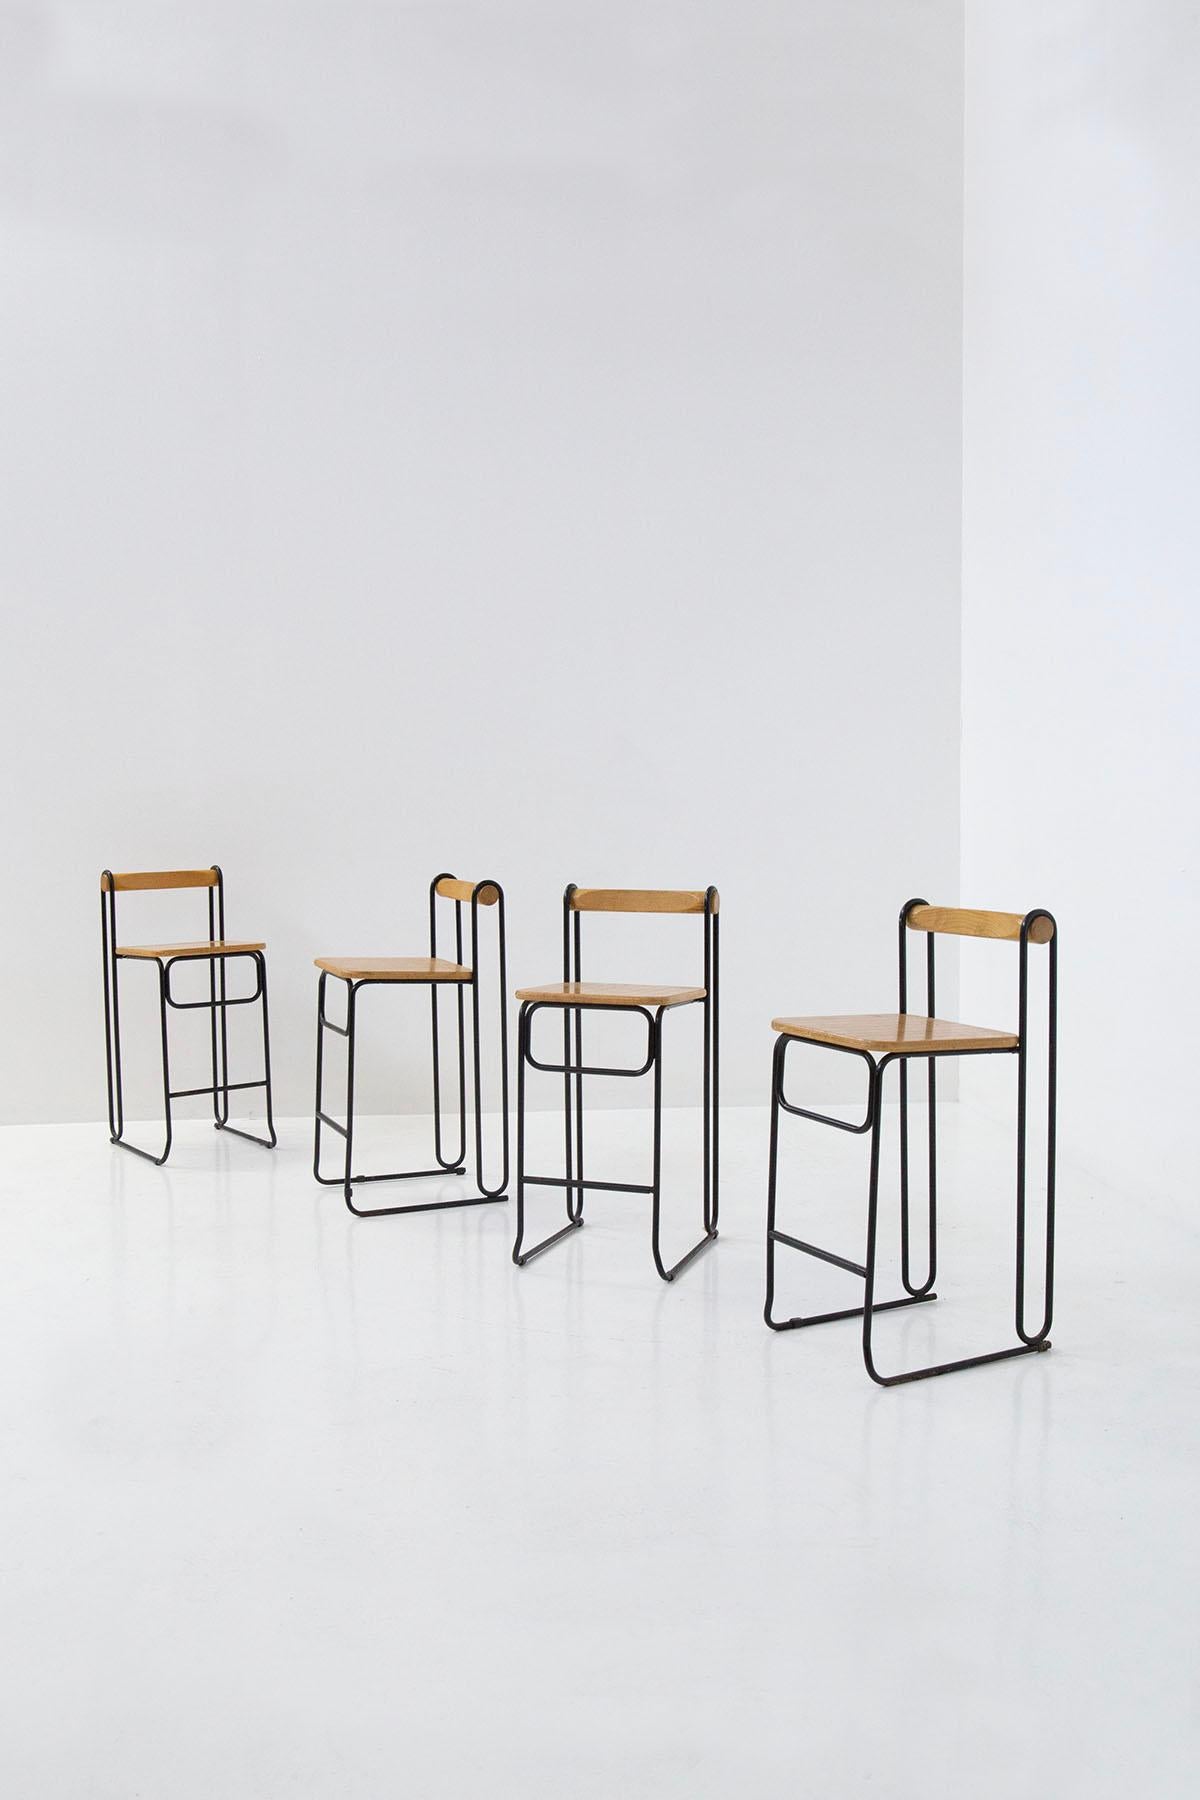 Extraordinary set of four chairs of Italian manufacture. Lesedie are tall and can also be categorized as high stools. The set presents very eccentric and geometric lines where line and design are the protagonists.
The chairs are dated circa 1980s